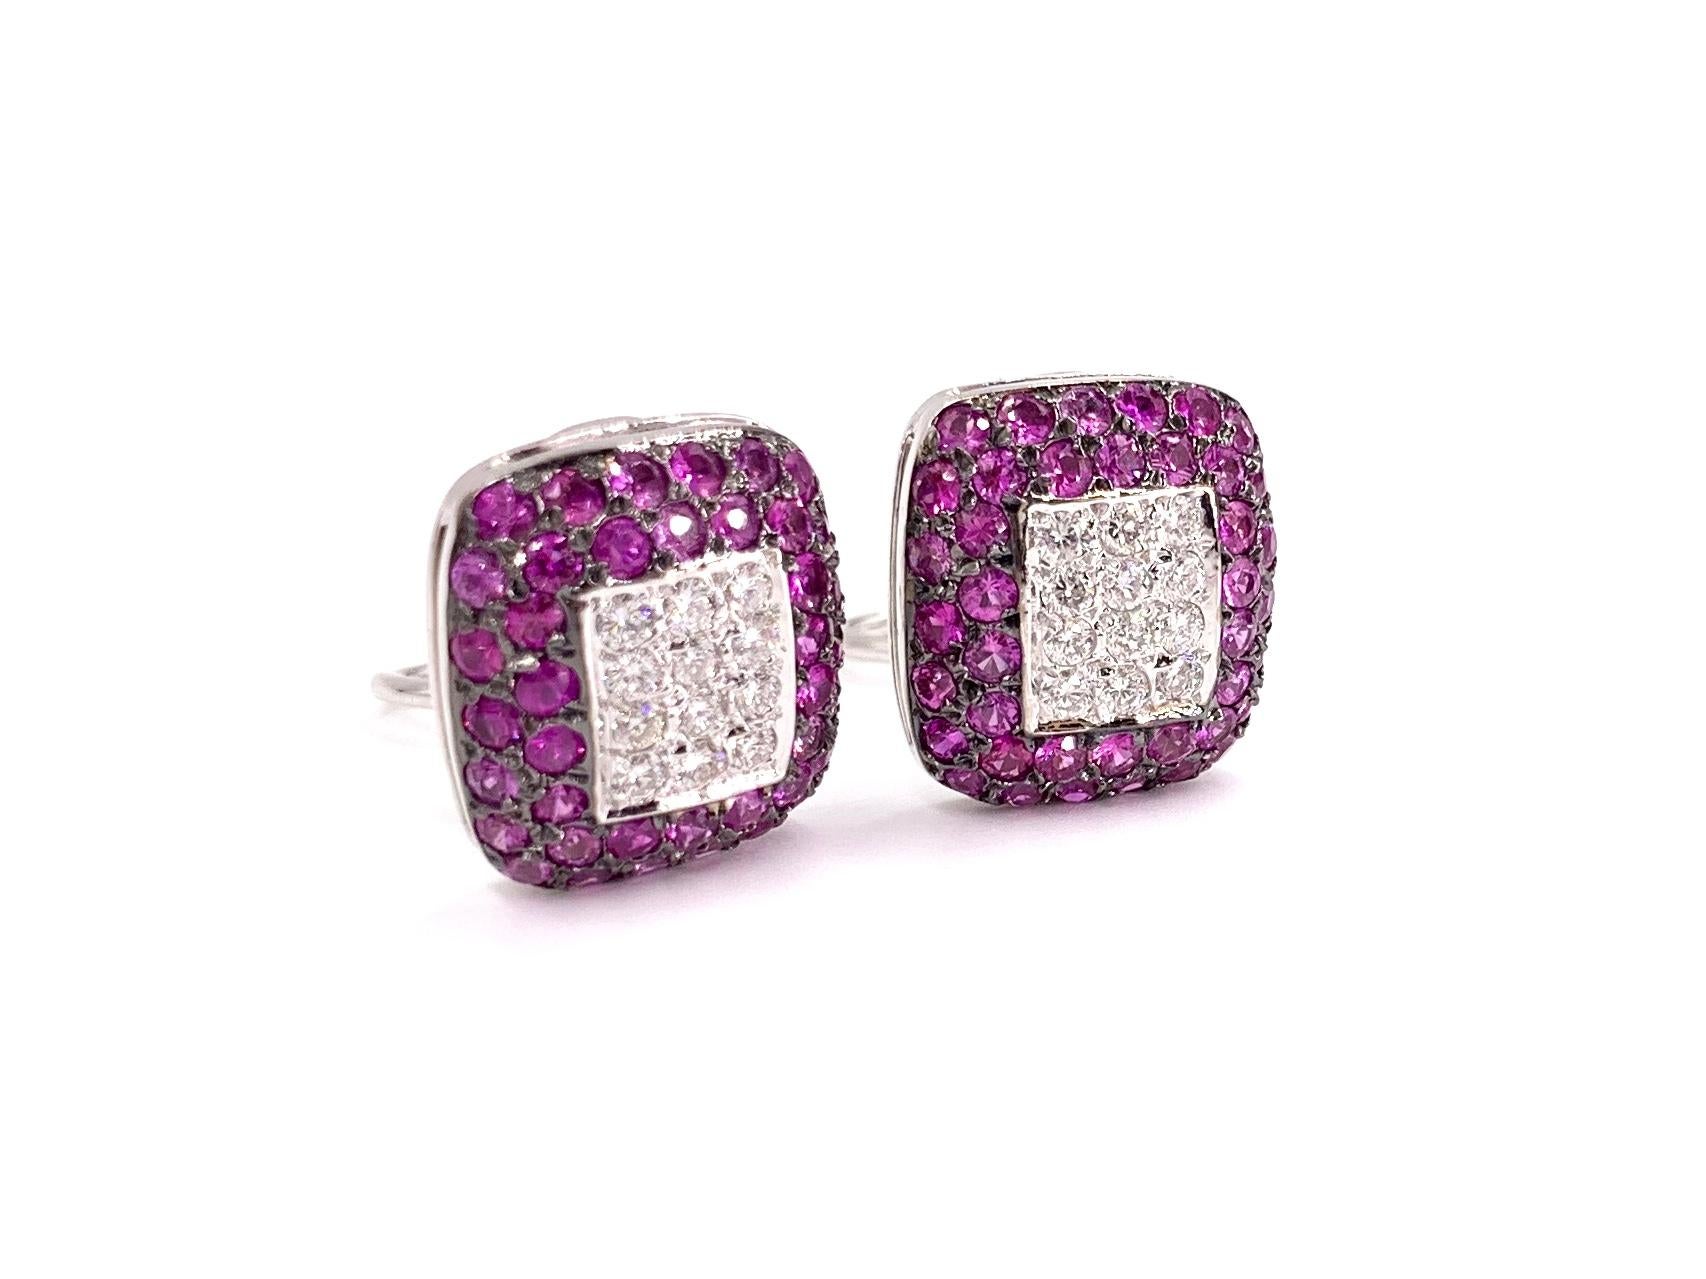 Perfect every day earrings with generous sparkle and a pop of color. These 18 karat white gold button cushion shaped earrings feature expertly pavé set round brilliant white diamonds and pink sapphires. Diamond total weight is .60 carats at